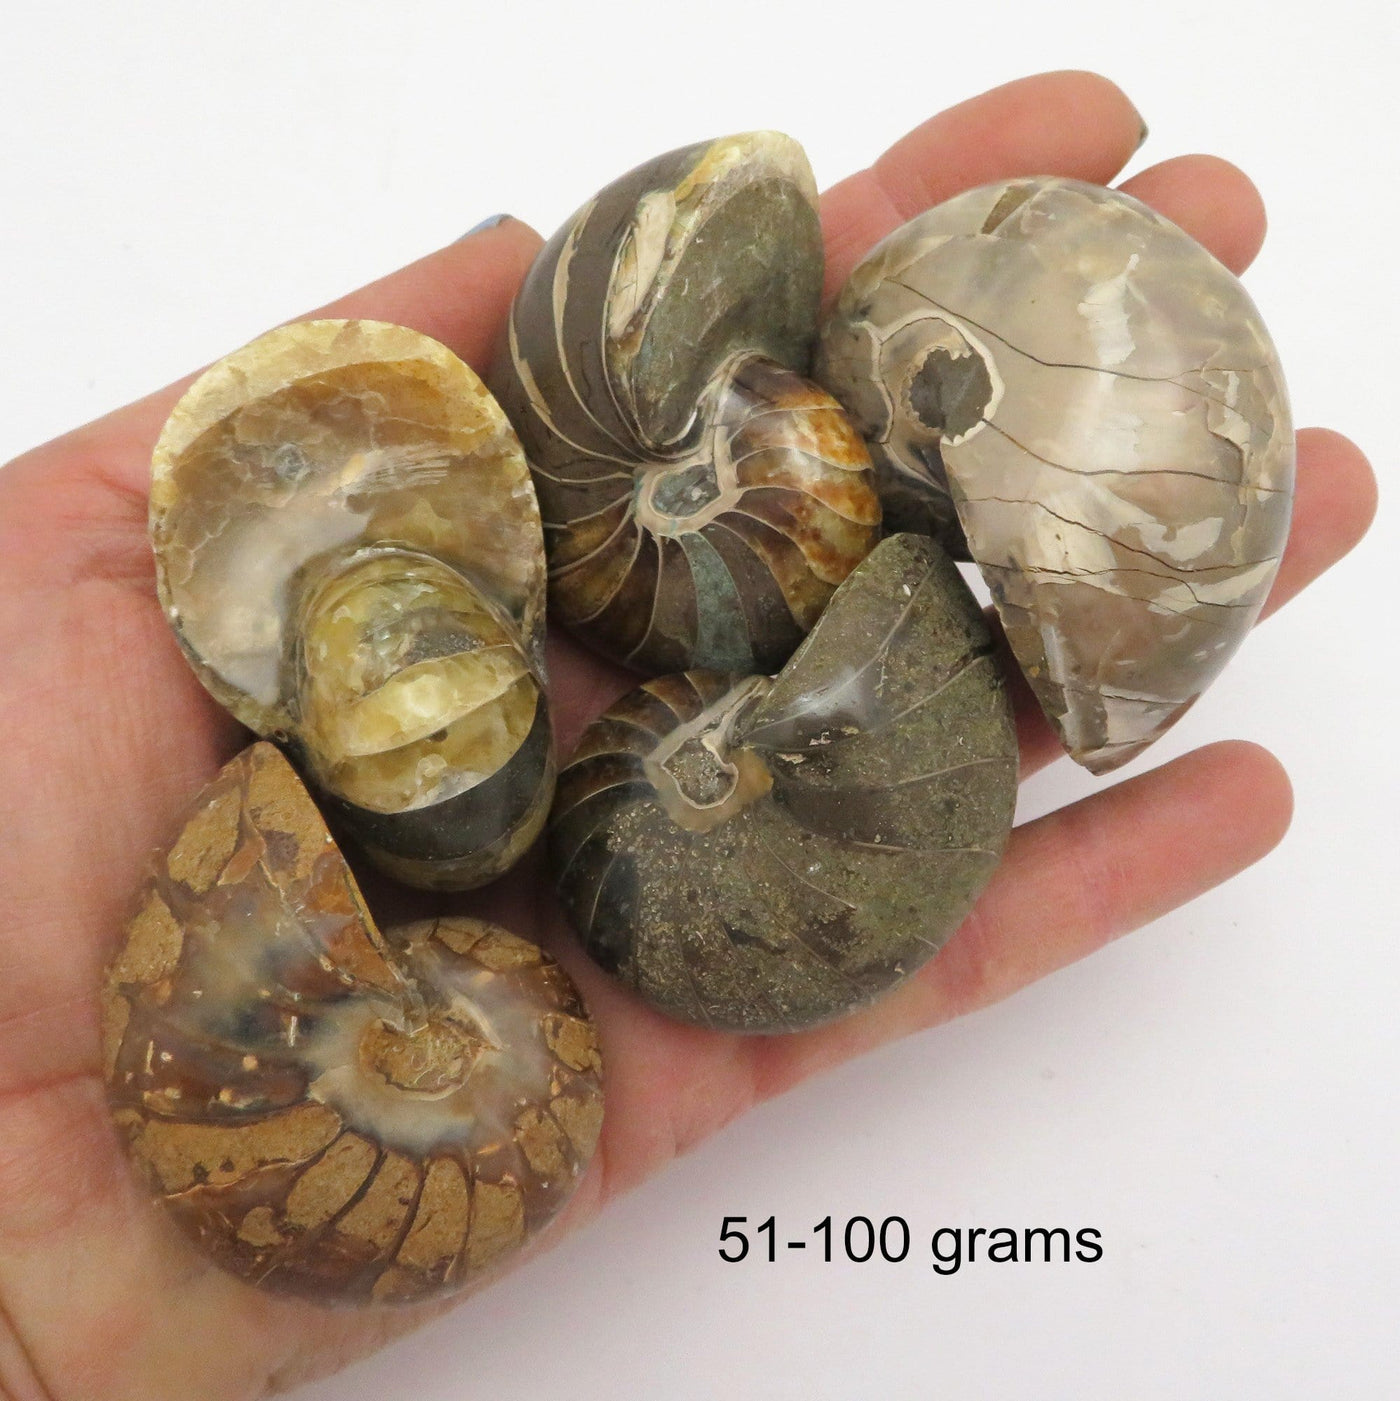 Nautilus fossil - 51-100 grams in a hand